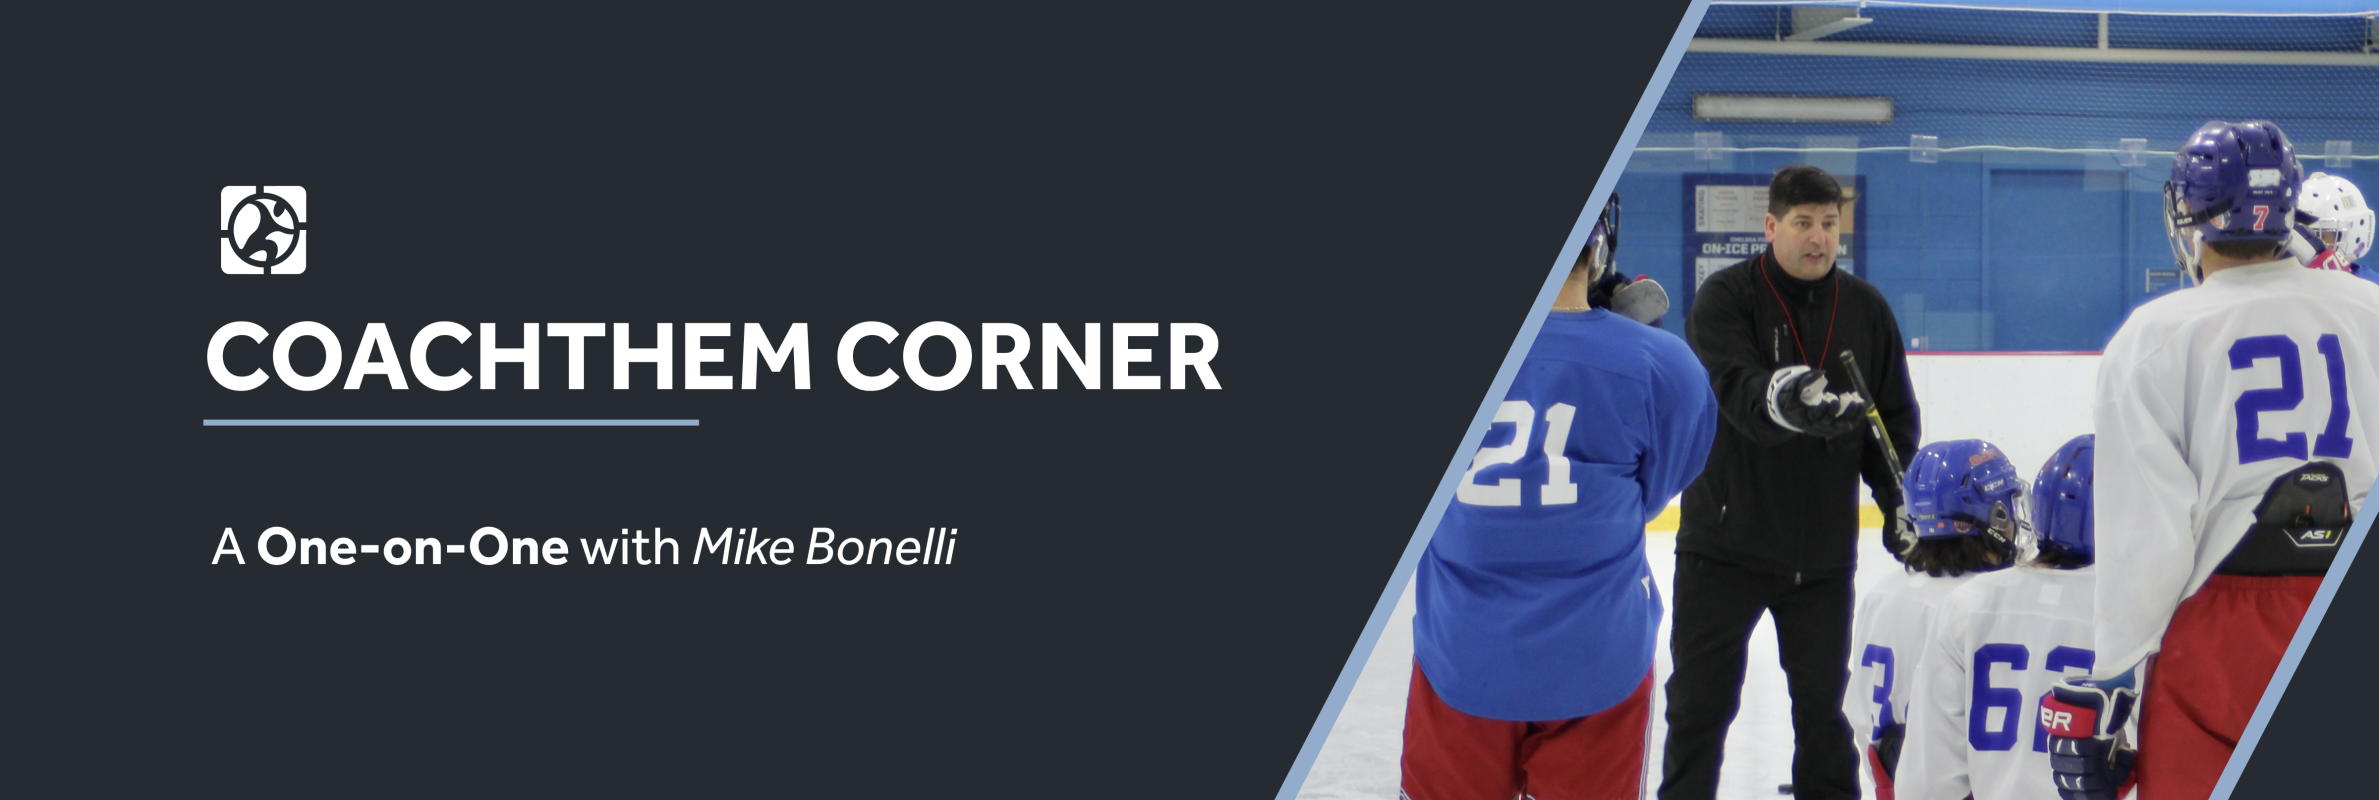 A One-on-One with Mike Bonelli